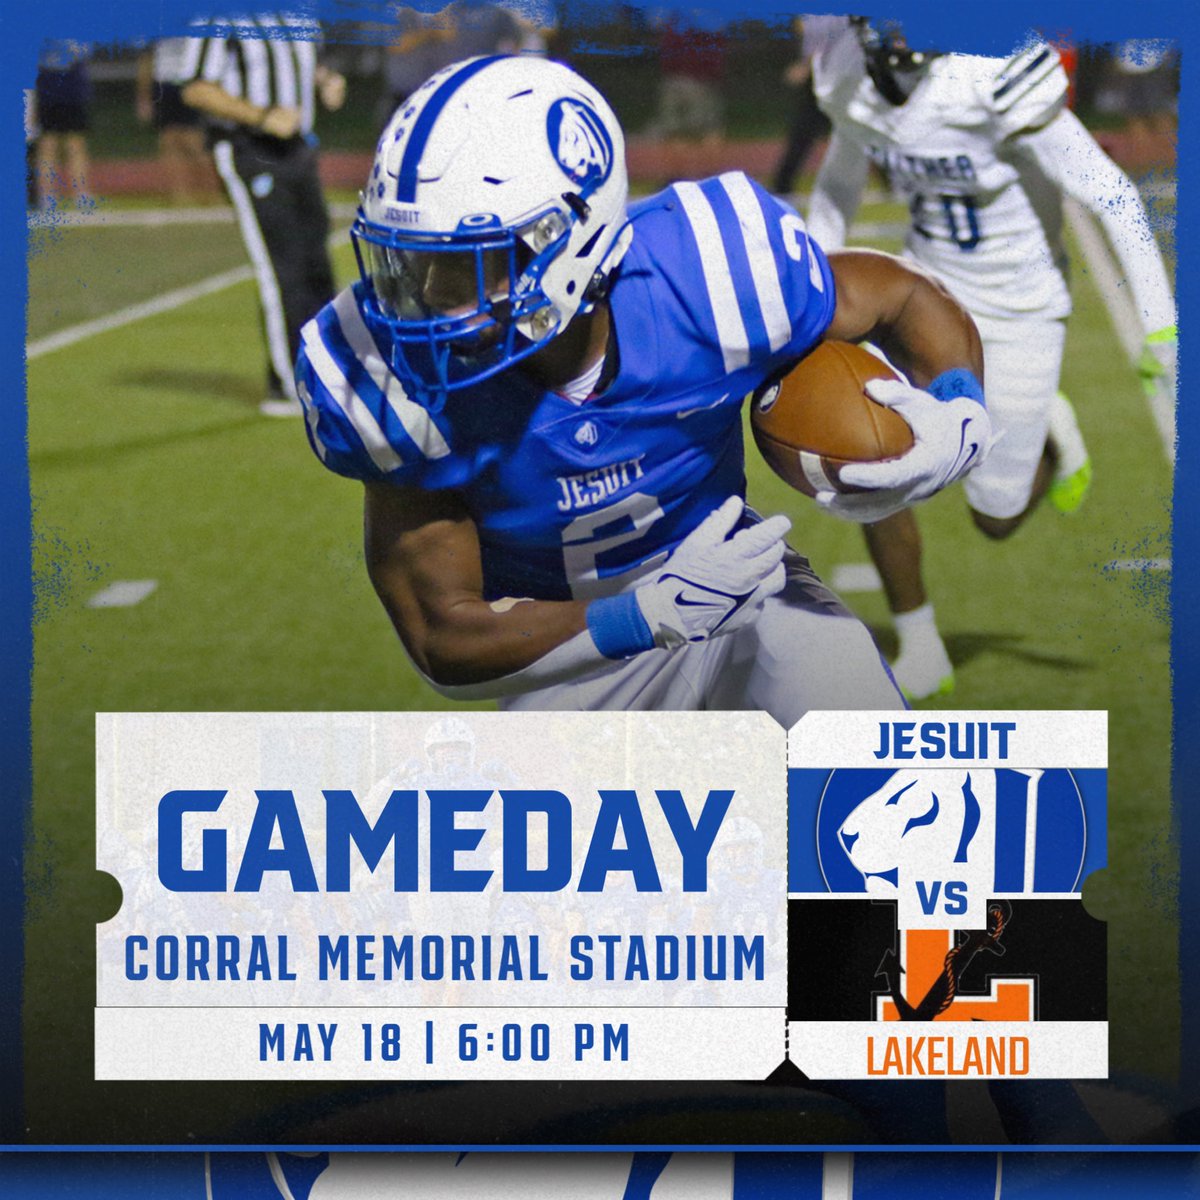 Jesuit hosts Lakeland at Corral Memorial Stadium, come out and support the Tigers in the spring football game! If you can’t make it, the livestream will be on Facebook and YouTube. Facebook: Facebook.com/JesuitHighScho… YouTube: m.youtube.com/@JesuitTigersS… #AMDG #GoTigers